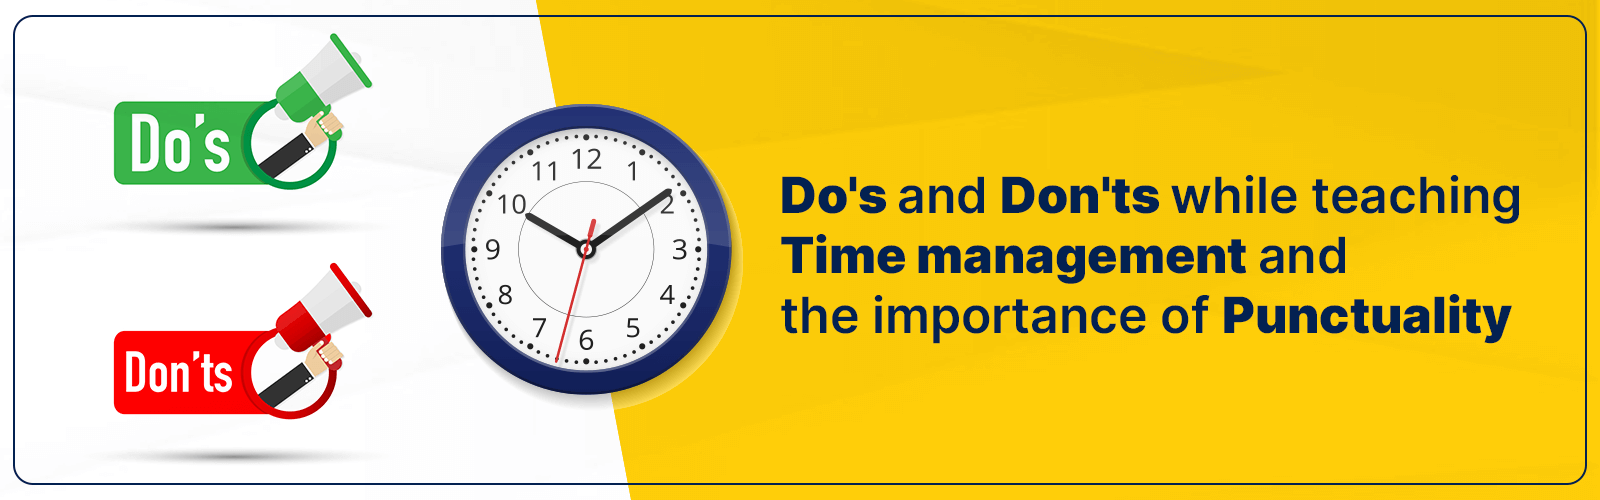 Do’s and don’ts while teaching time management and the importance of punctuality - CGR International School - Best School in Madhapur / Hyderabad